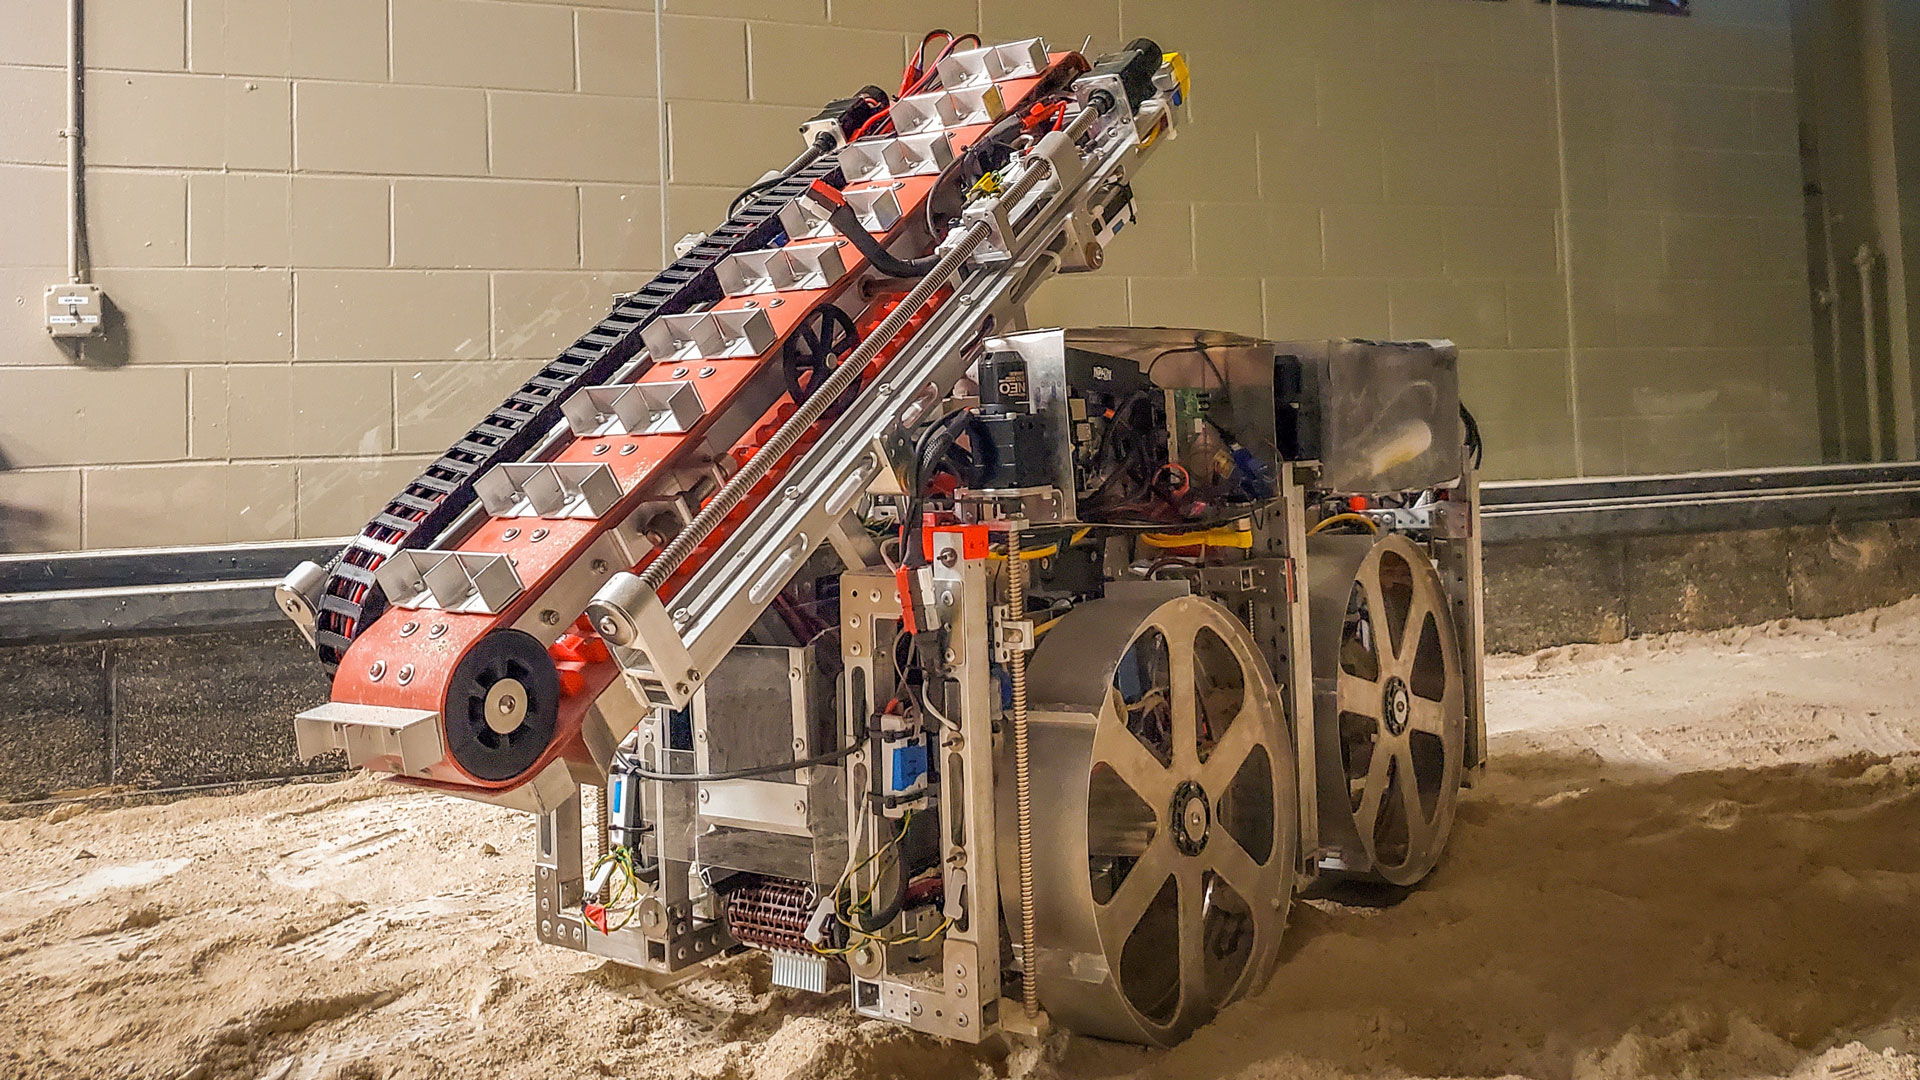 A robot with four wheels and a conveyor belt for extraterrestrial digging against a wall that displays six NASA championship flags